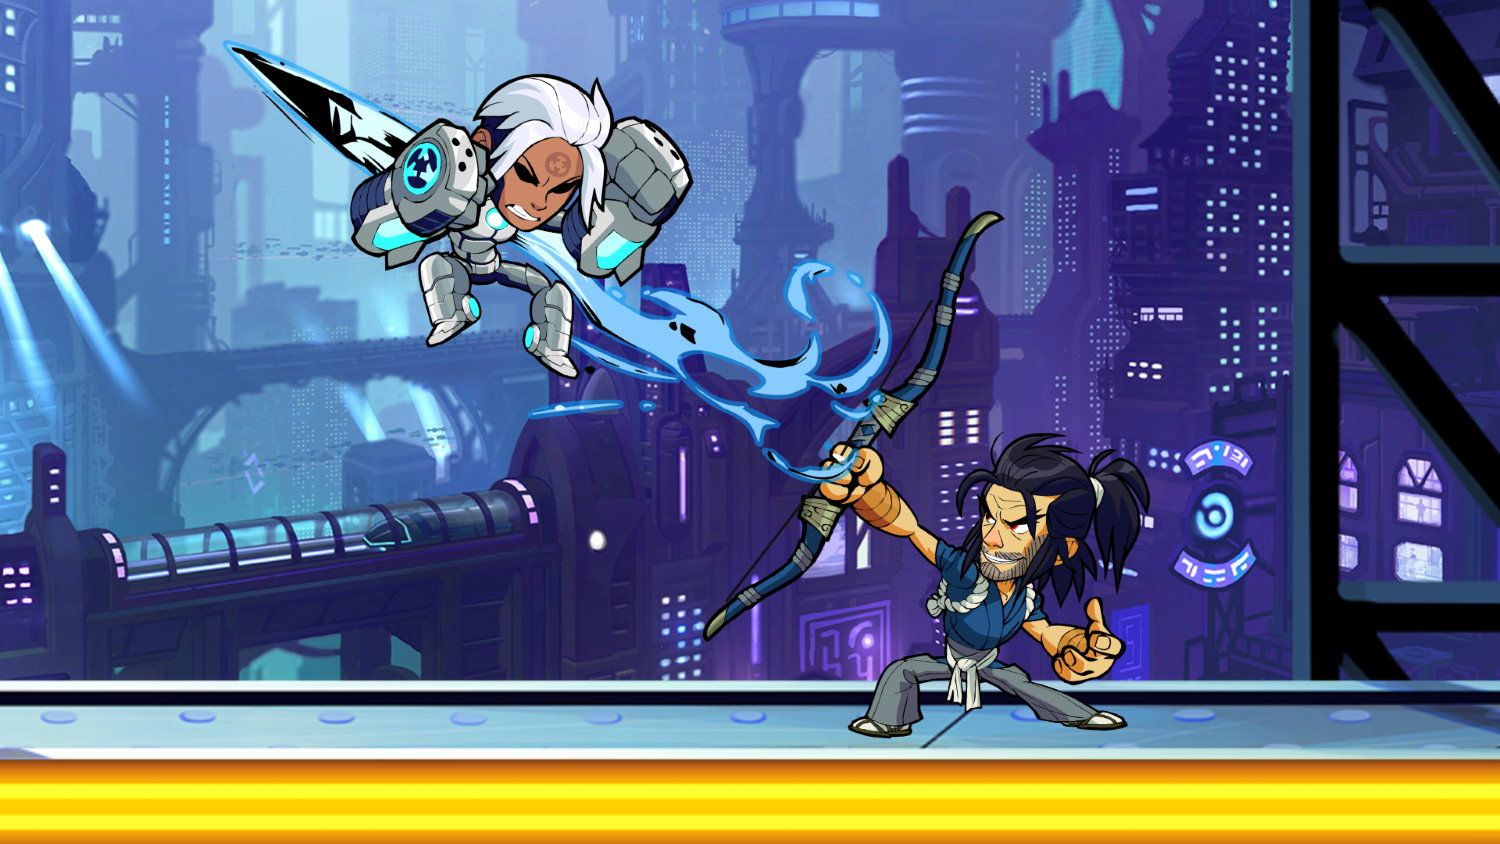 Brawlhalla Is Coming To Mobile With Console/PC Cross-Play